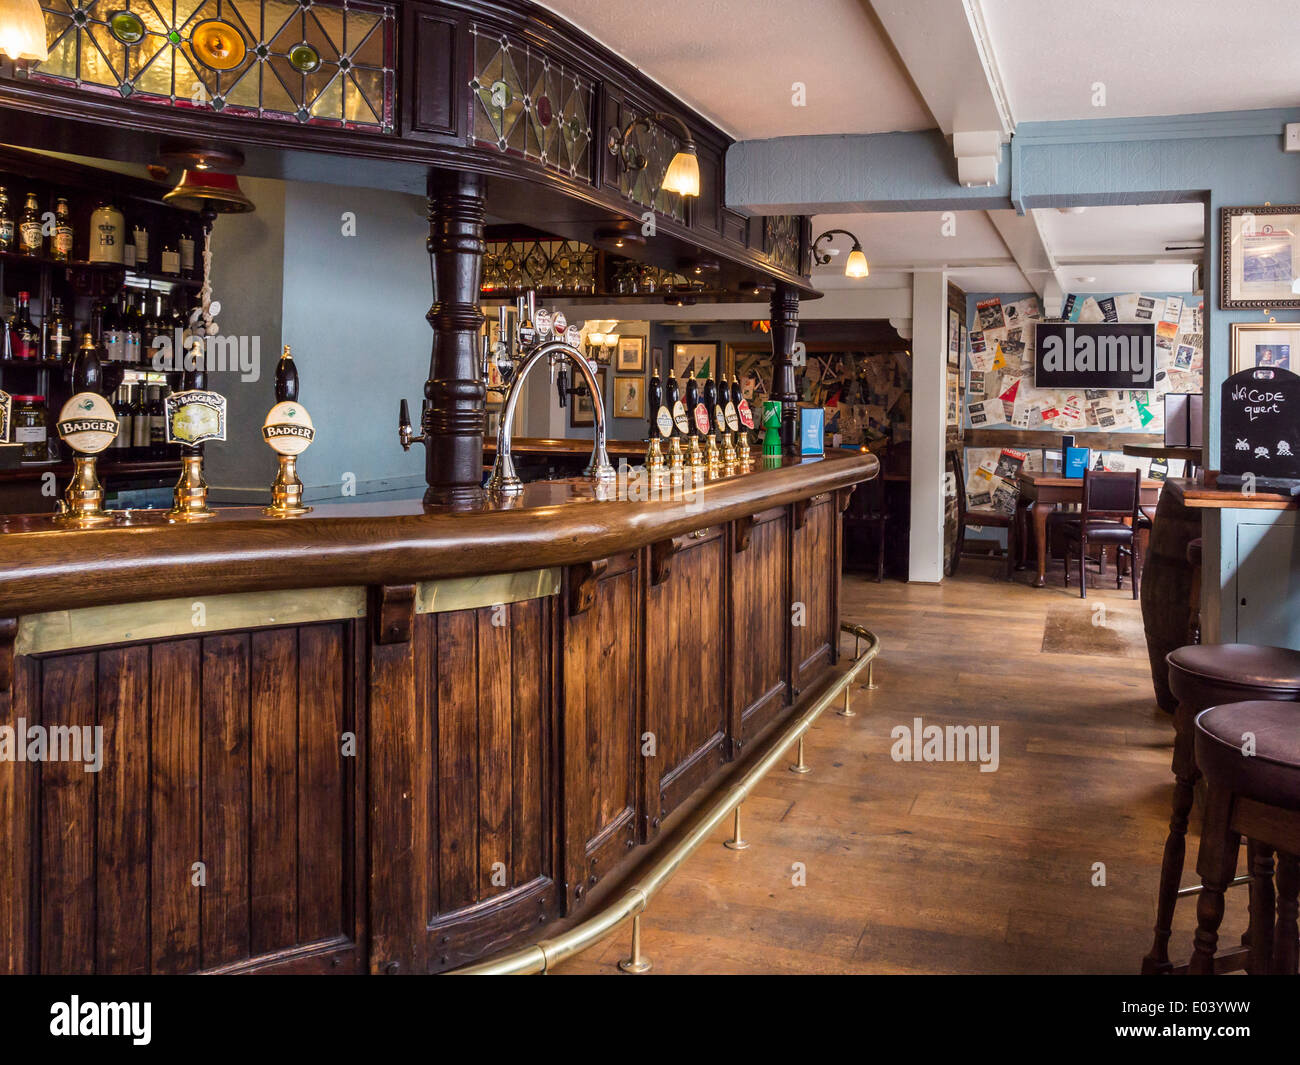 The Eel Pie pub interior with wooden bar, beer pumps and stained glass in  Church Street, Twickenham, Greater London, UK Stock Photo